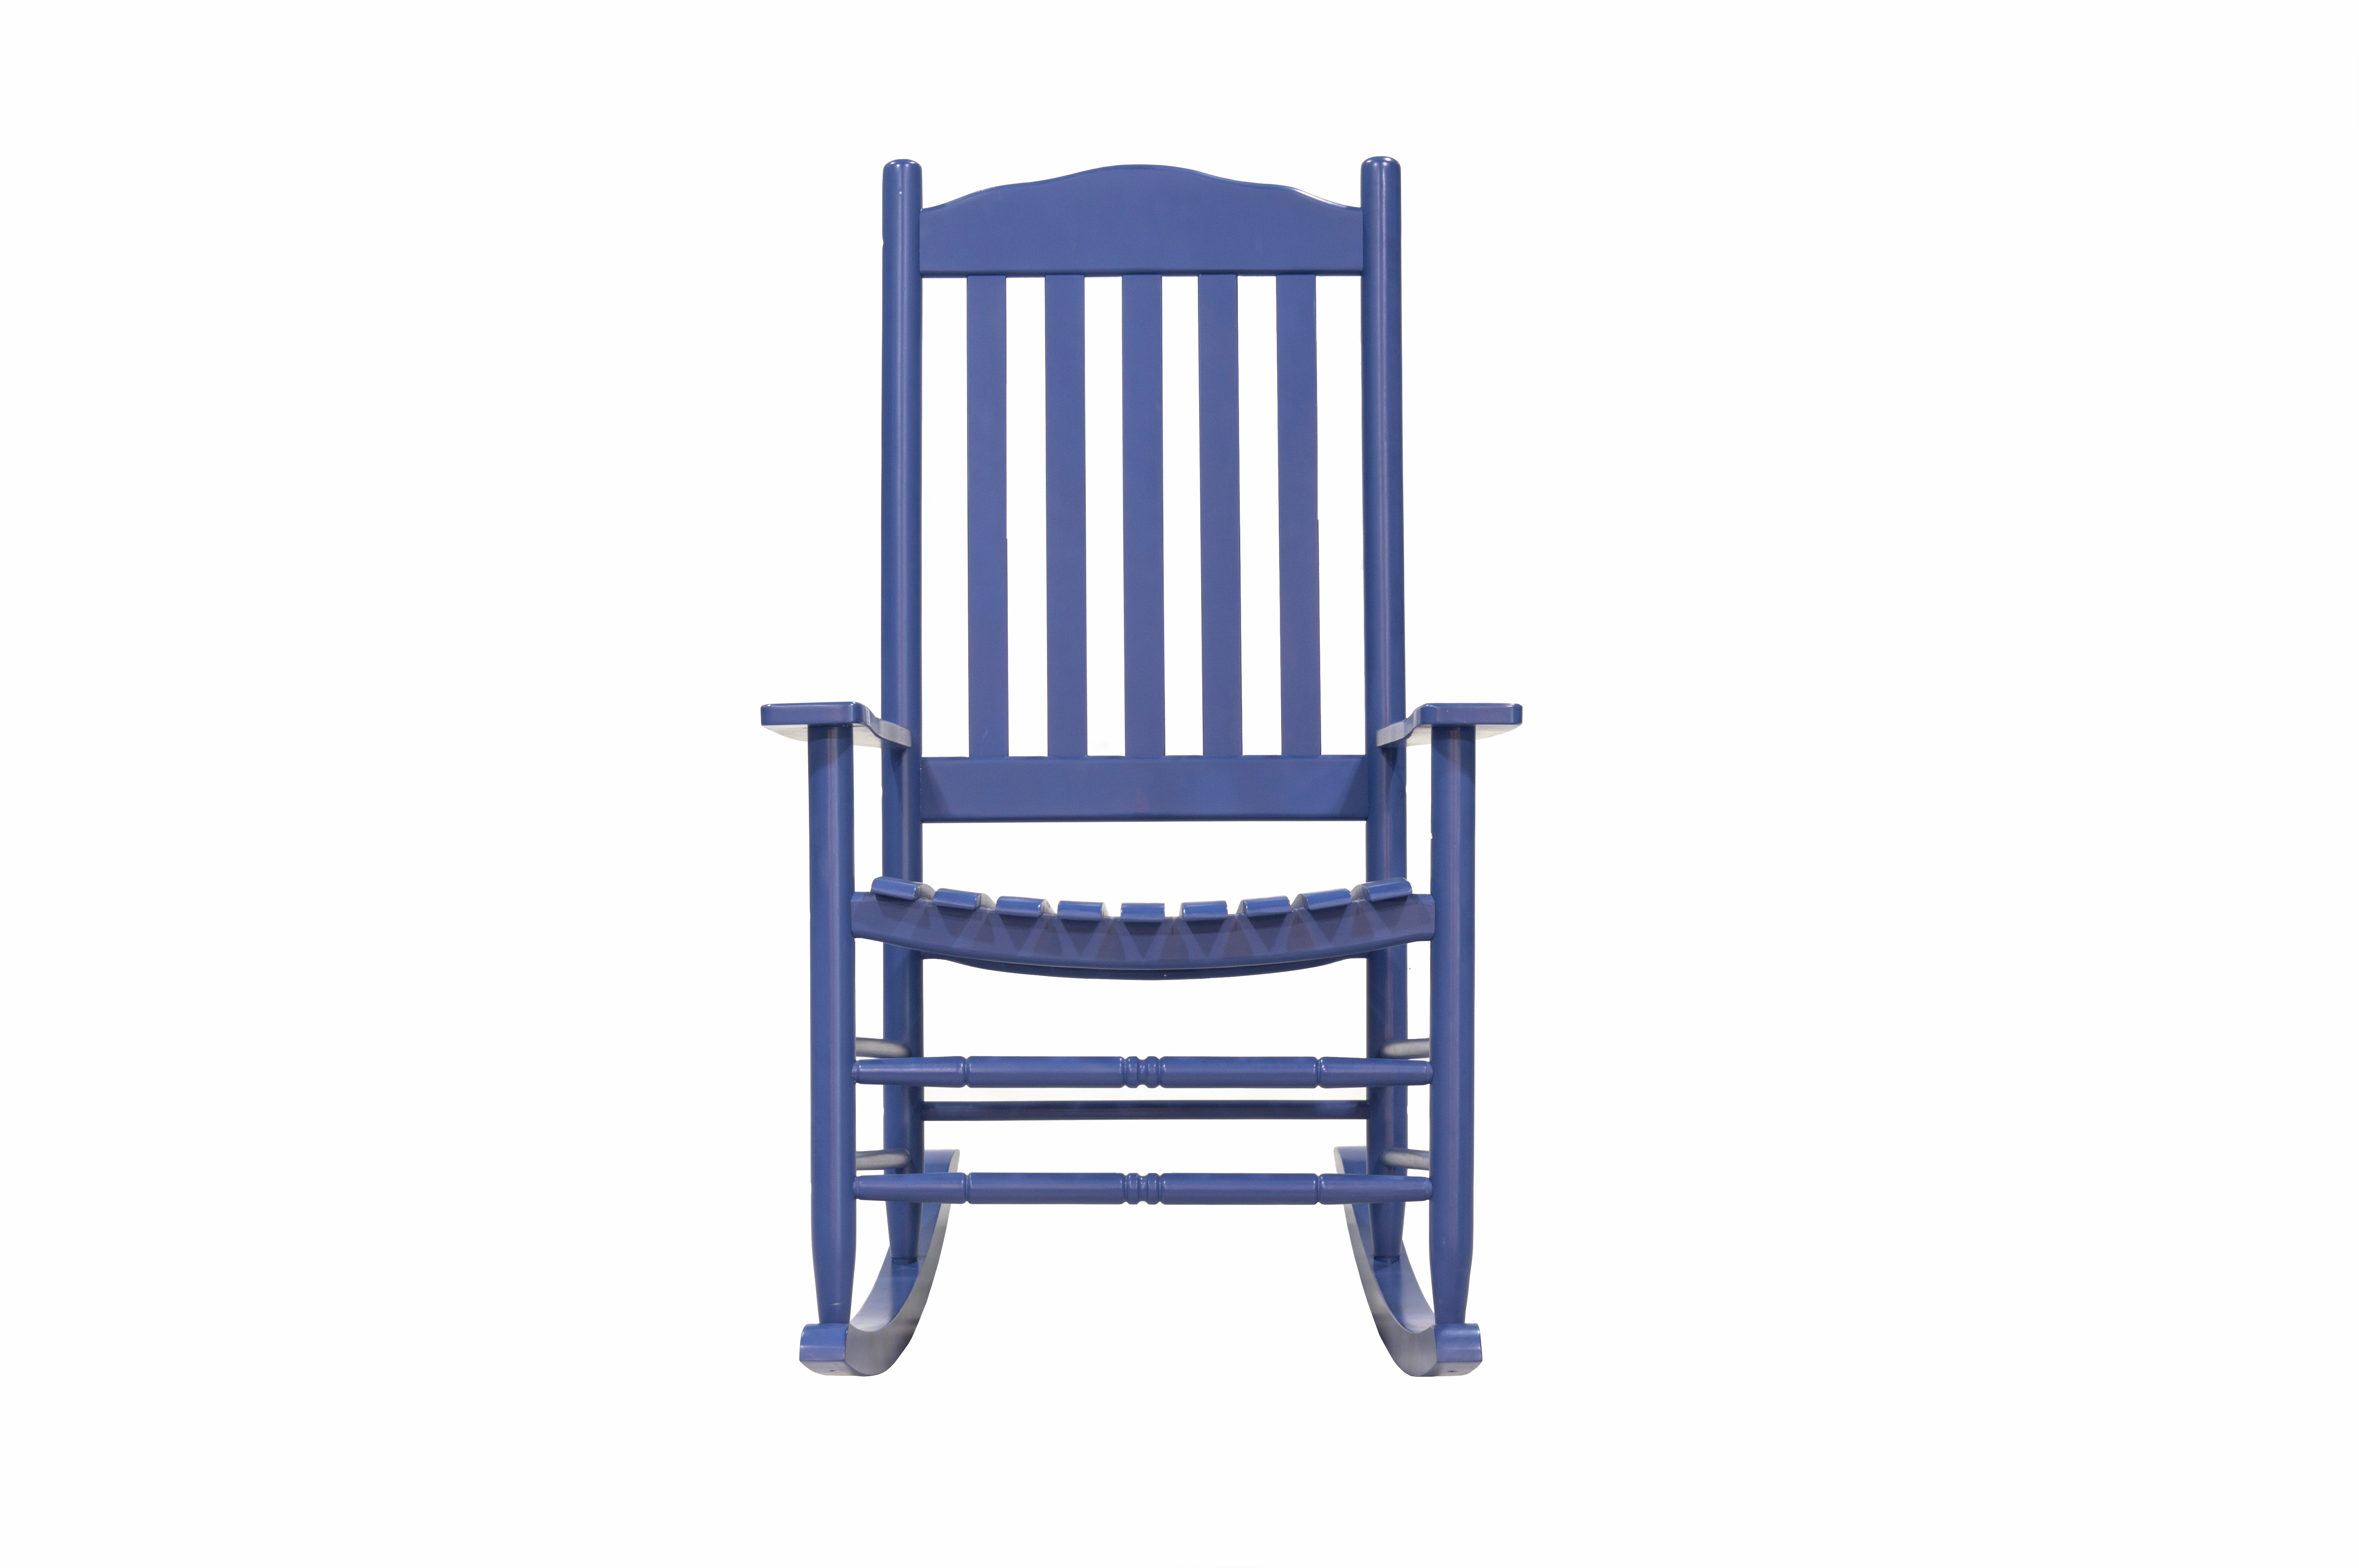 Outdoor Patio Garden Furniture 3-Piece Wood Porch Rocking Chair Set, Weather Resistant Finish,2 Rocking Chairs and 1 Side Table-Blue - image 4 of 11